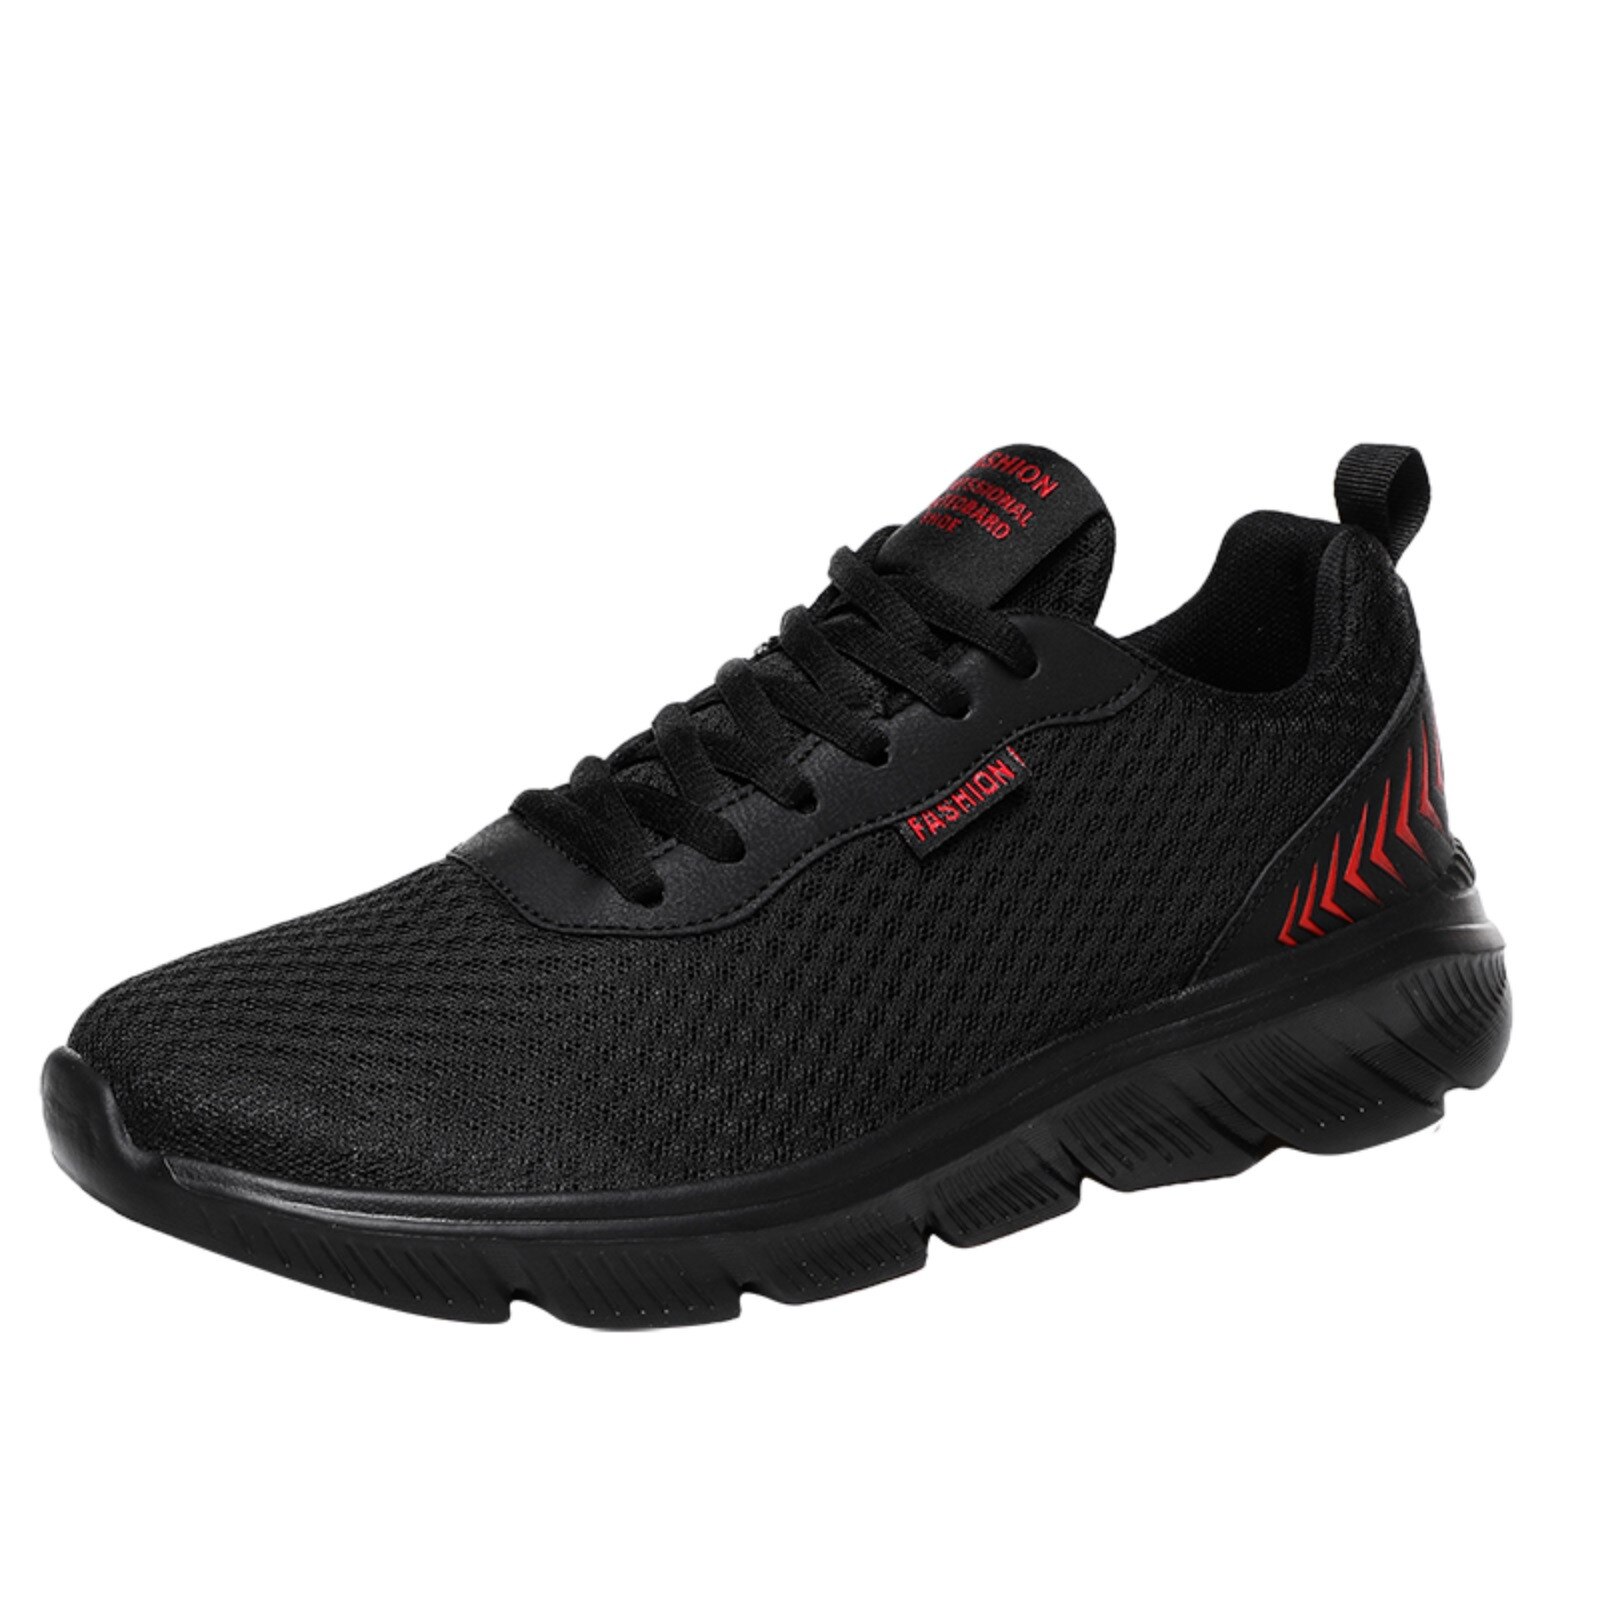 Men Running Shoes Outdoor Hiking Sports Sneakers Breathable Comfortable Athletic Training Footwear Male Lace Up Light Sneaker